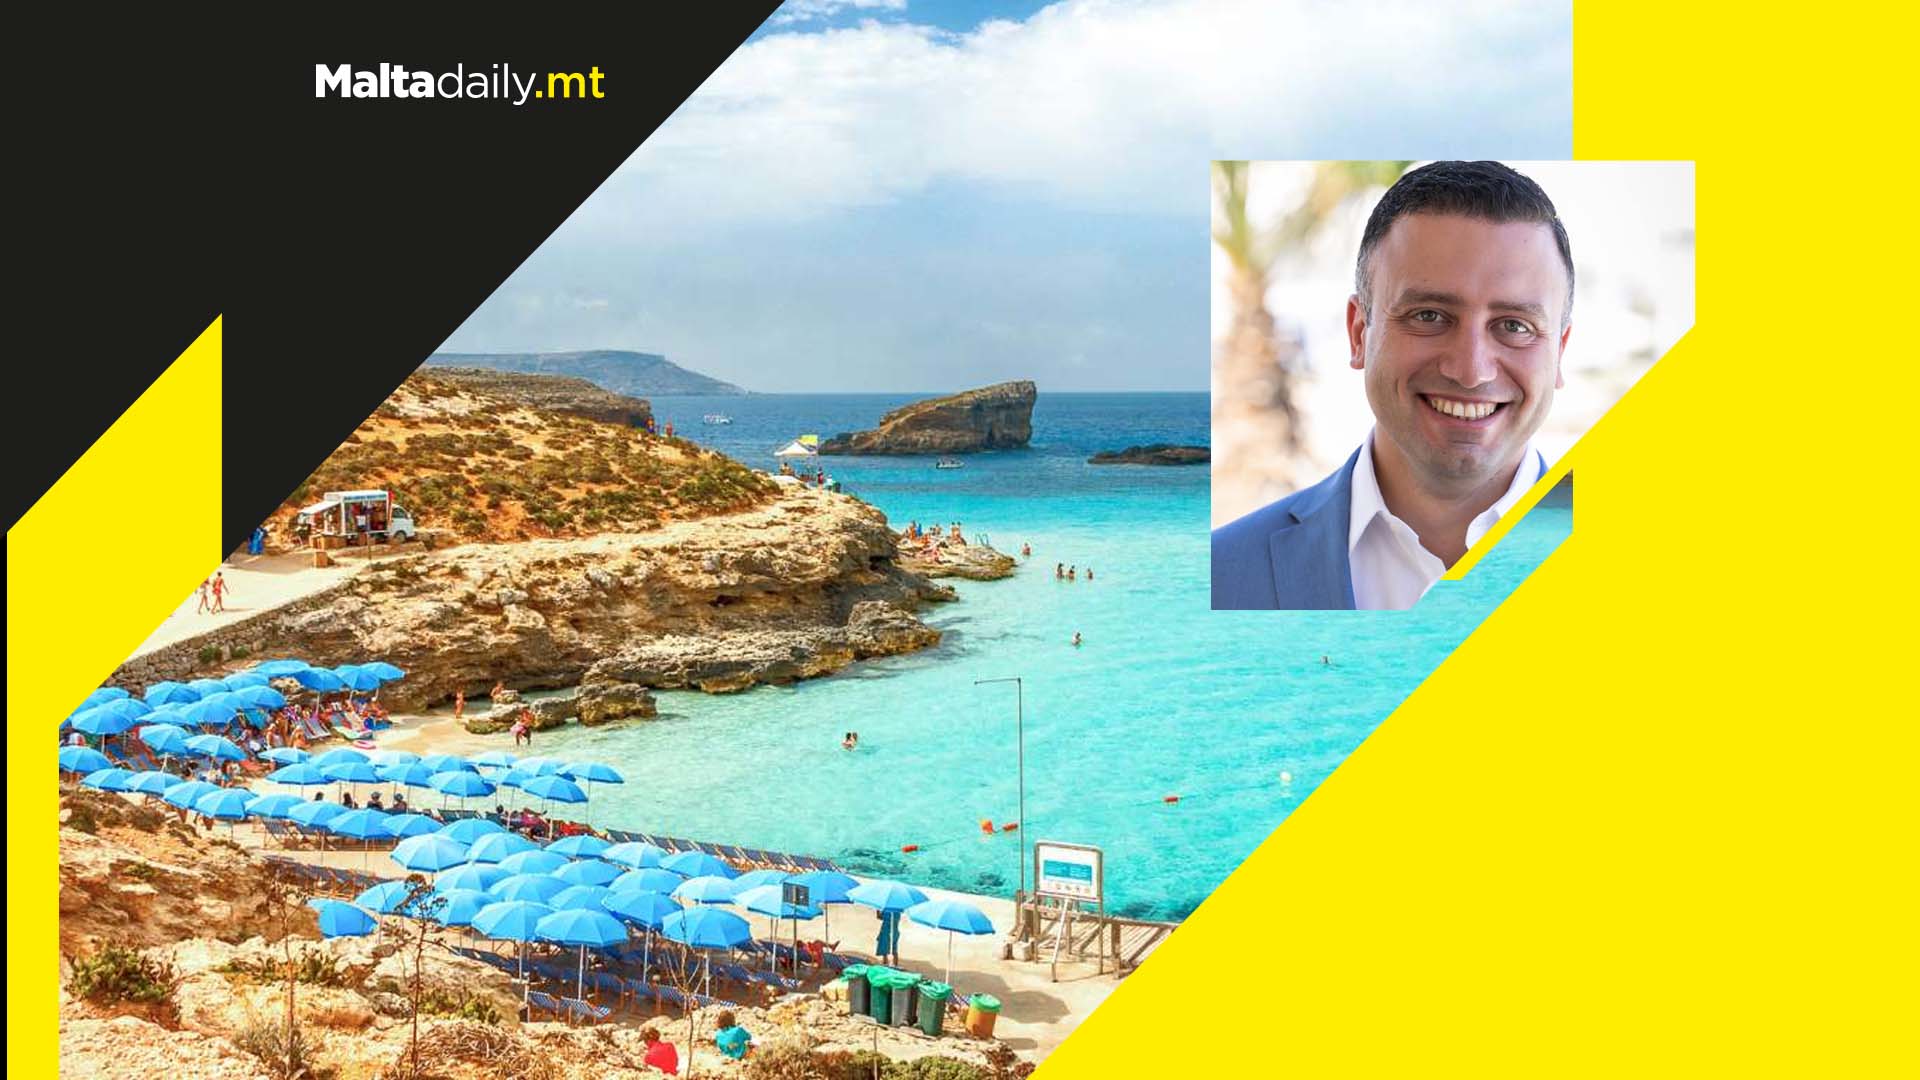 There should be no more construction on Comino says Tourism Minister